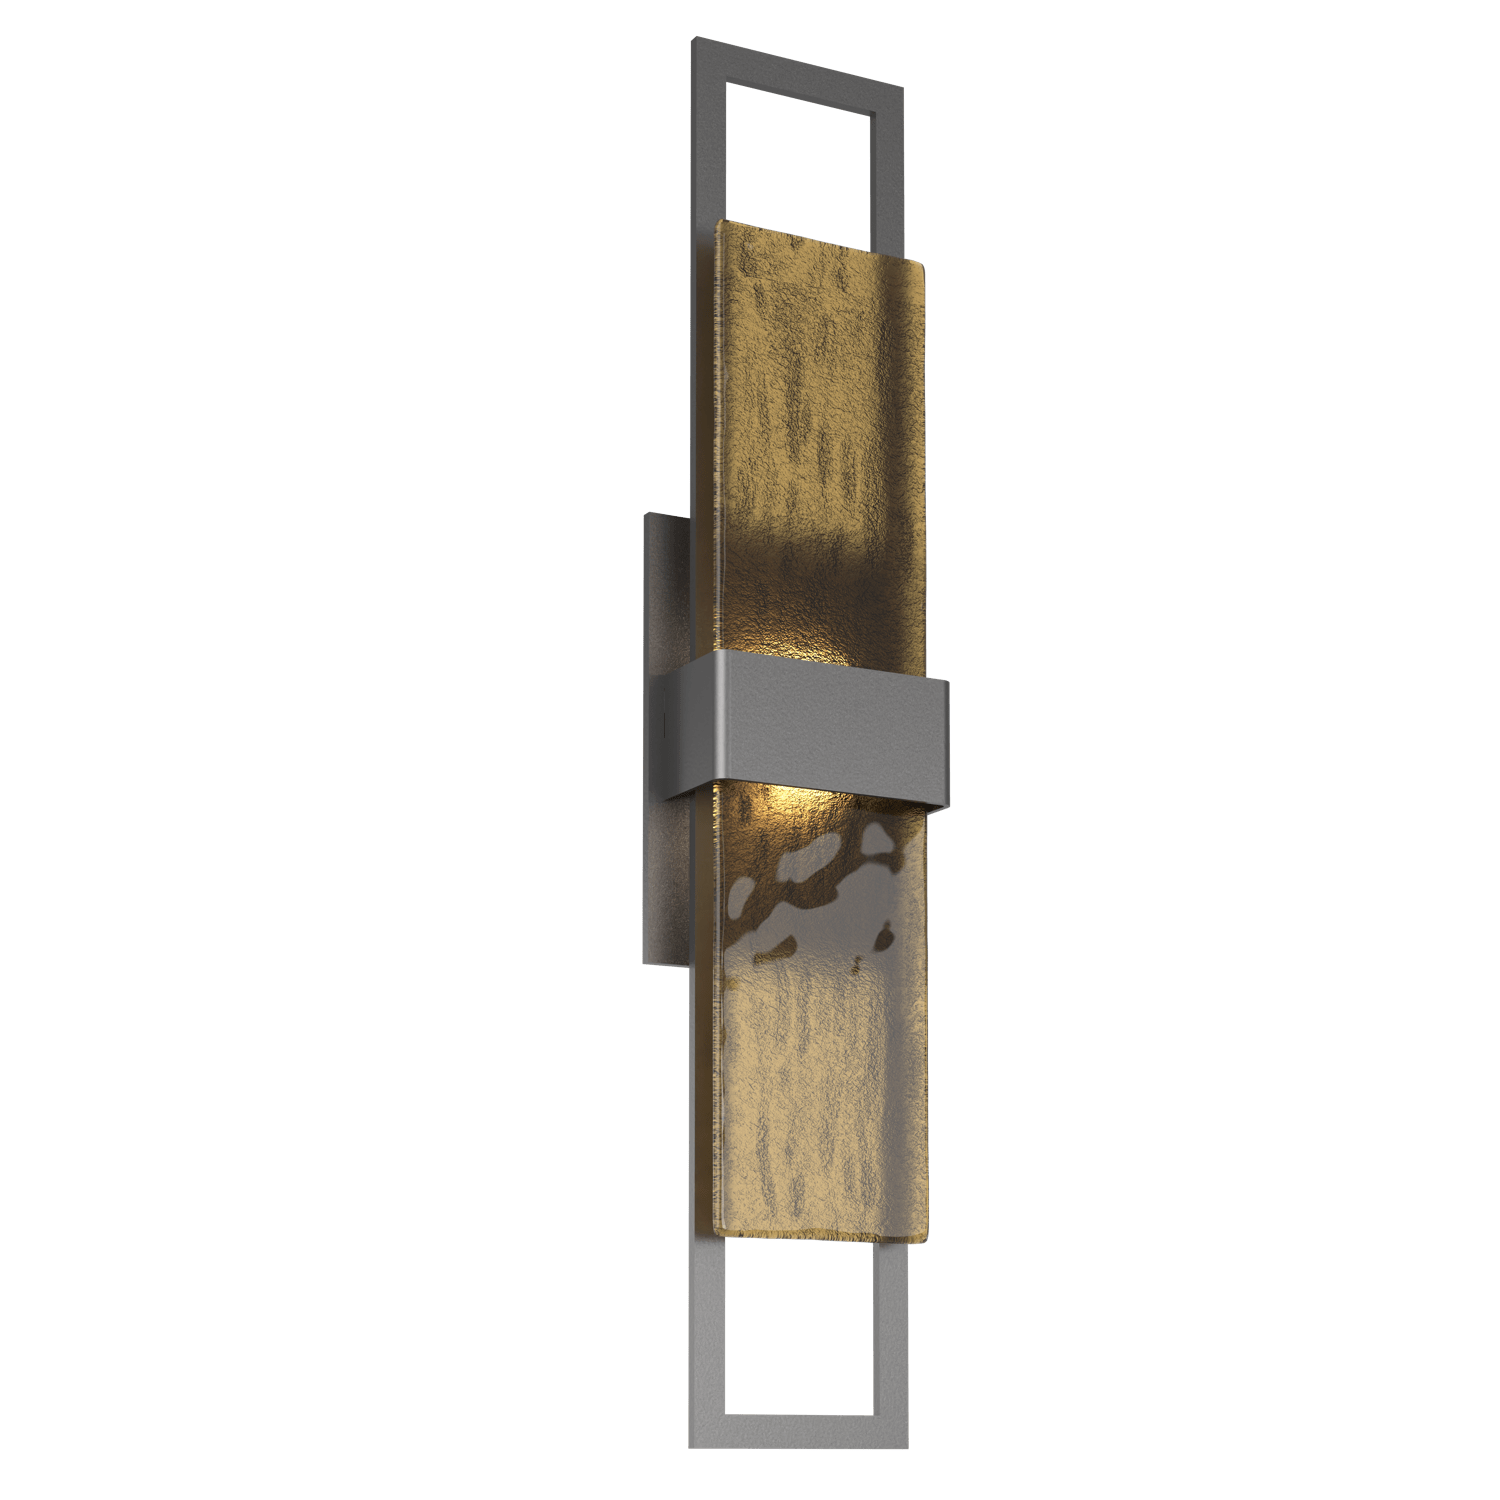 ODB0085-02-AG-BG-Hammerton-Studio-Sasha-28-inch-outdoor-sconce-with-argento-grey-finish-and-bronze-granite-glass-shades-and-LED-lamping